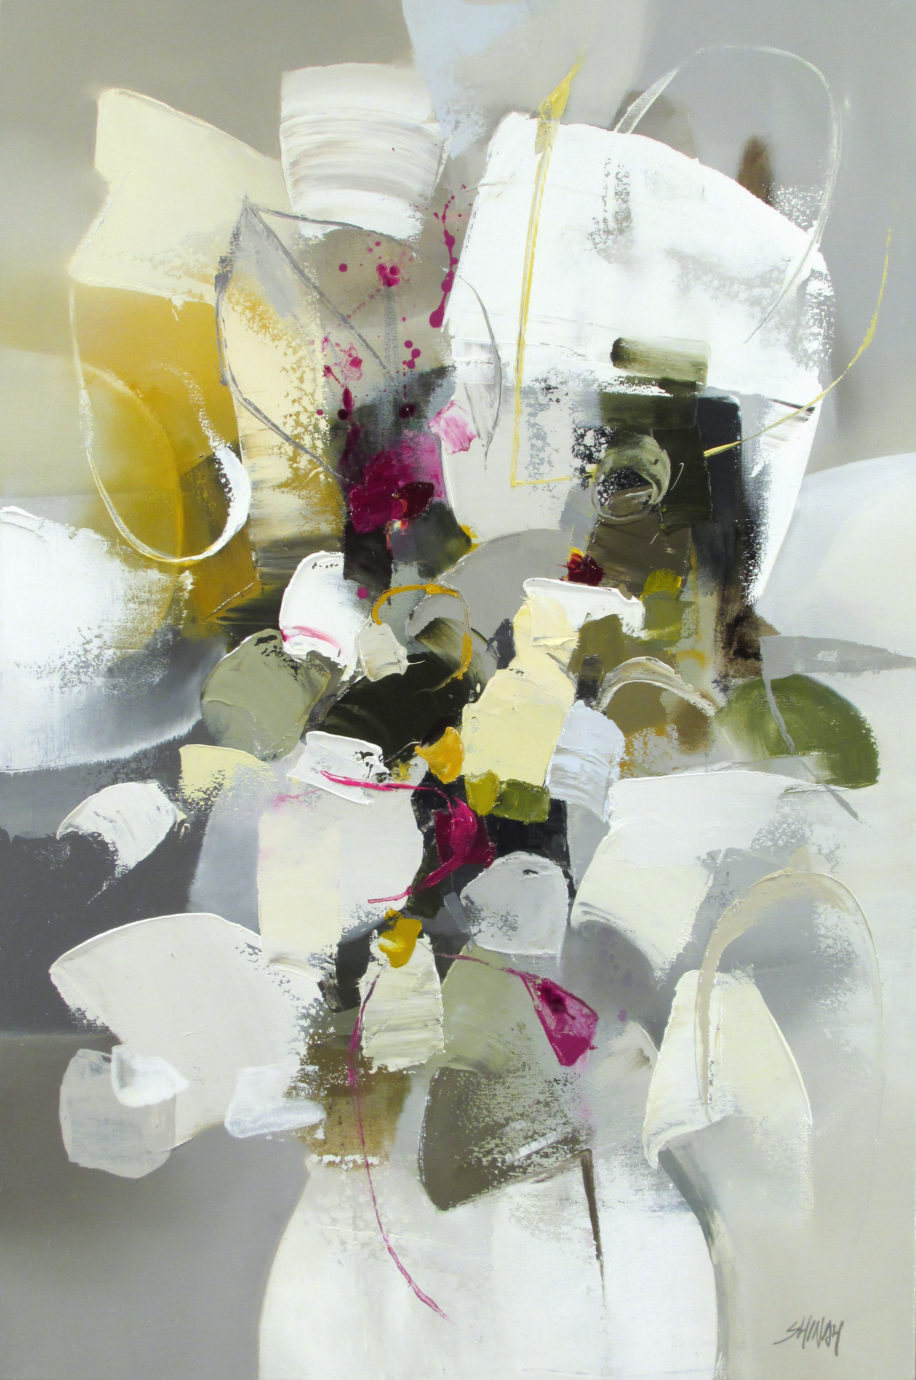 Floral painting, Companion I by Shinah Lee at The Avenue Gallery, a contemporary fine art gallery in Victoria, BC, Canada.